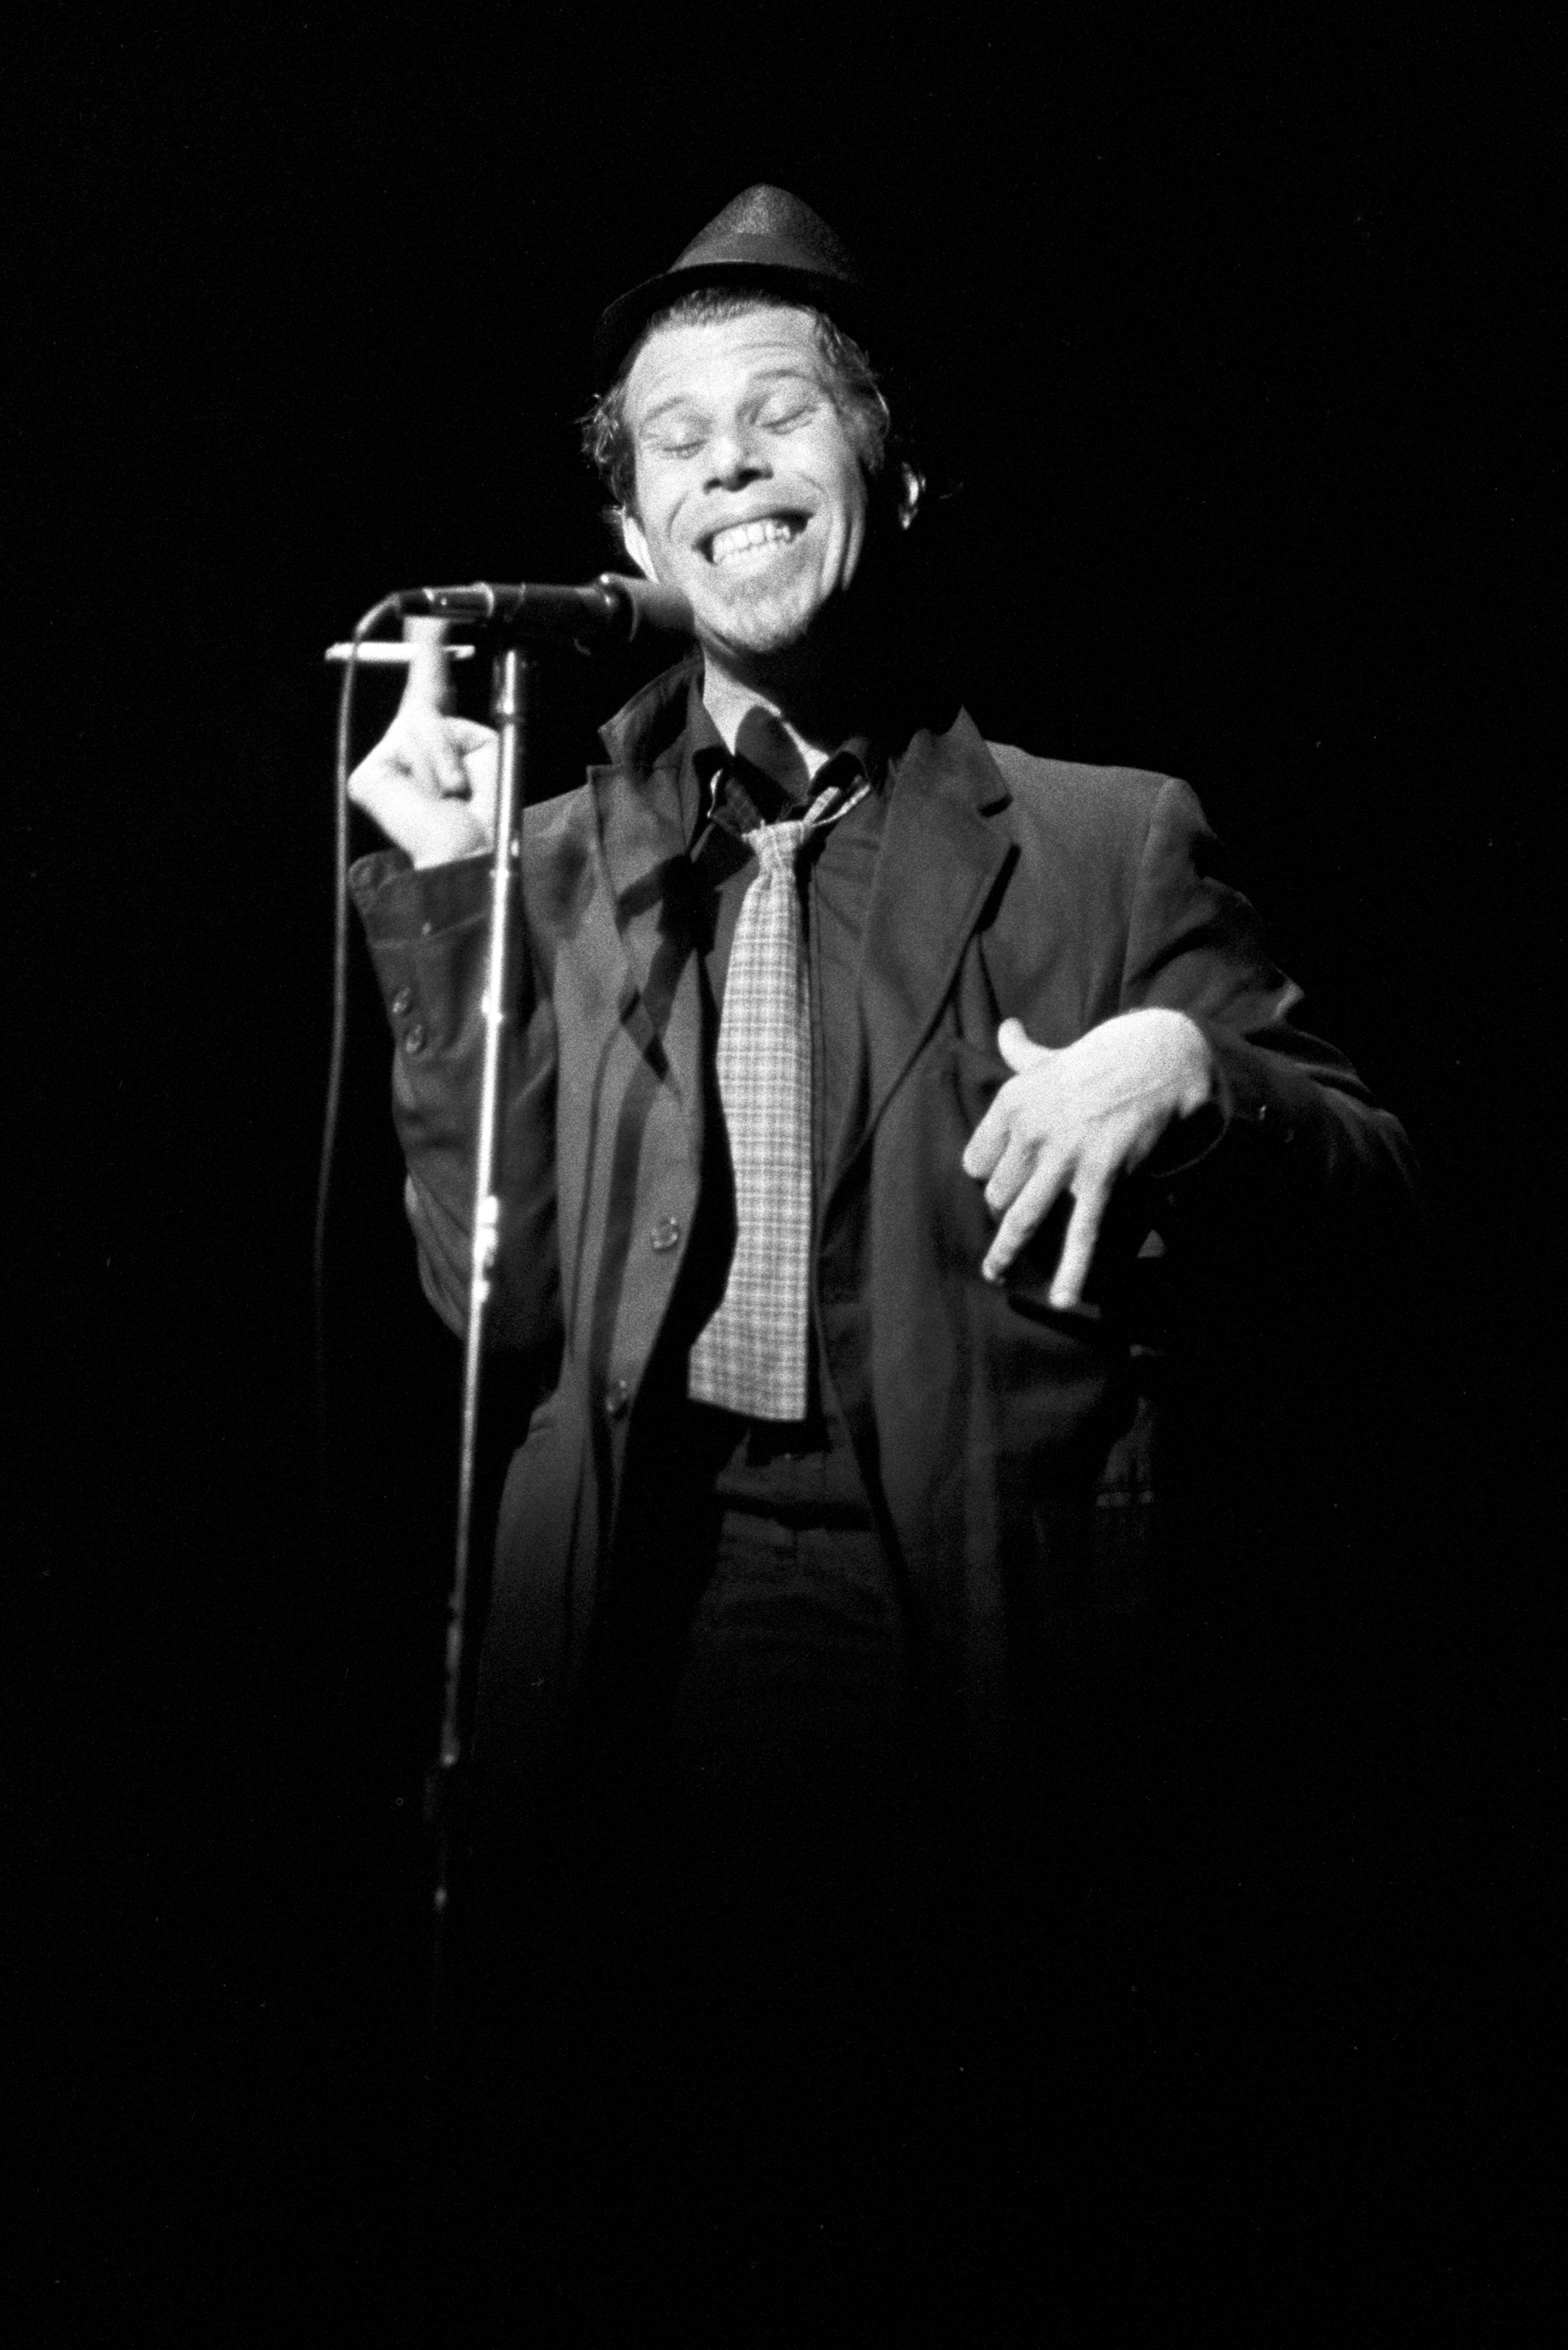 Tom Waits: Our 1985 Interview, <i></noscript>
<p><b>How do you audition a road manager?</b><br />
Well, you take a couple of candidates out toe the Mojave Desert and you leave the car by the side of the road and you walk for a couple of days, and when you get to a stream, the guys that want to drink from a cup, those are the guys you don’t want. It’s the guys that throw themselves headlong into the stream and just drink, those are the best soldiers. What I’m really looking for, though, is an all-midget orchestra. They could all stay in the same room and on stage they could all share the same light.</p>
<p><b>What’s your life like on the road?</b><br />
Well, you get up in the morning, along with millions of other Americans, and you go to the airport. You get to a new town. I go to the Chamber of Commerce as soon as I get in and talk to whoever is in charge. Sometimes I do. But most of the time you really don’t know where you are. It’s very possible that you may come out on stage and say, “It’s great to be here in St. Louis” and you could very well be in Denver or Settle. That’s happened.</p>
<p><b>I really hate it when bands come out and say “Hello, New York.”</b><br />
It’s an arrogant remark, isn’t it? Assuming that everyone of value connected with New York is there. I think it should be against the law for anyone to name a band after a city. <a href=